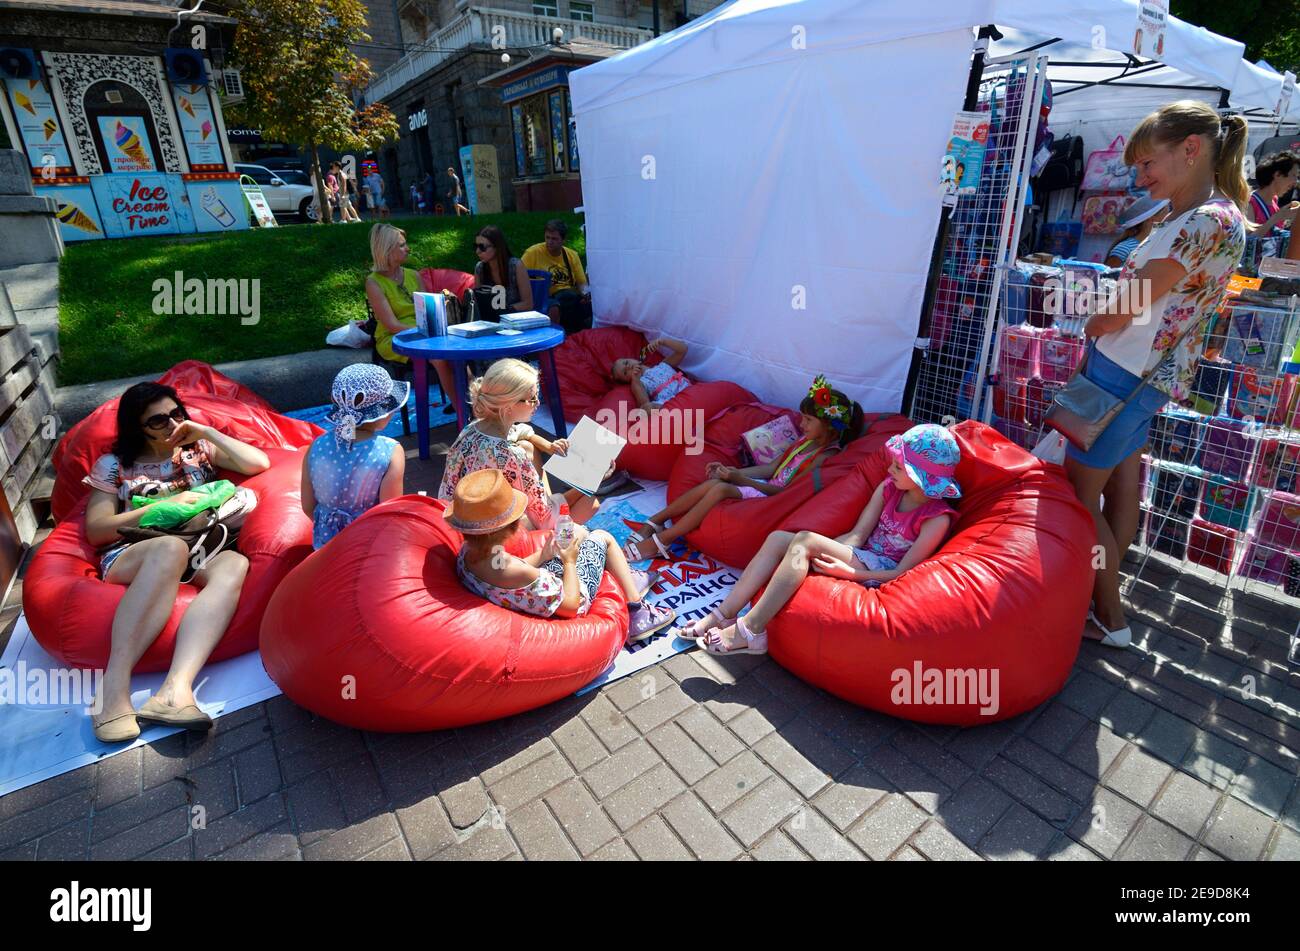 Children and women sitting on beanbag chairs in a street lounge zone, reading books Stock Photo